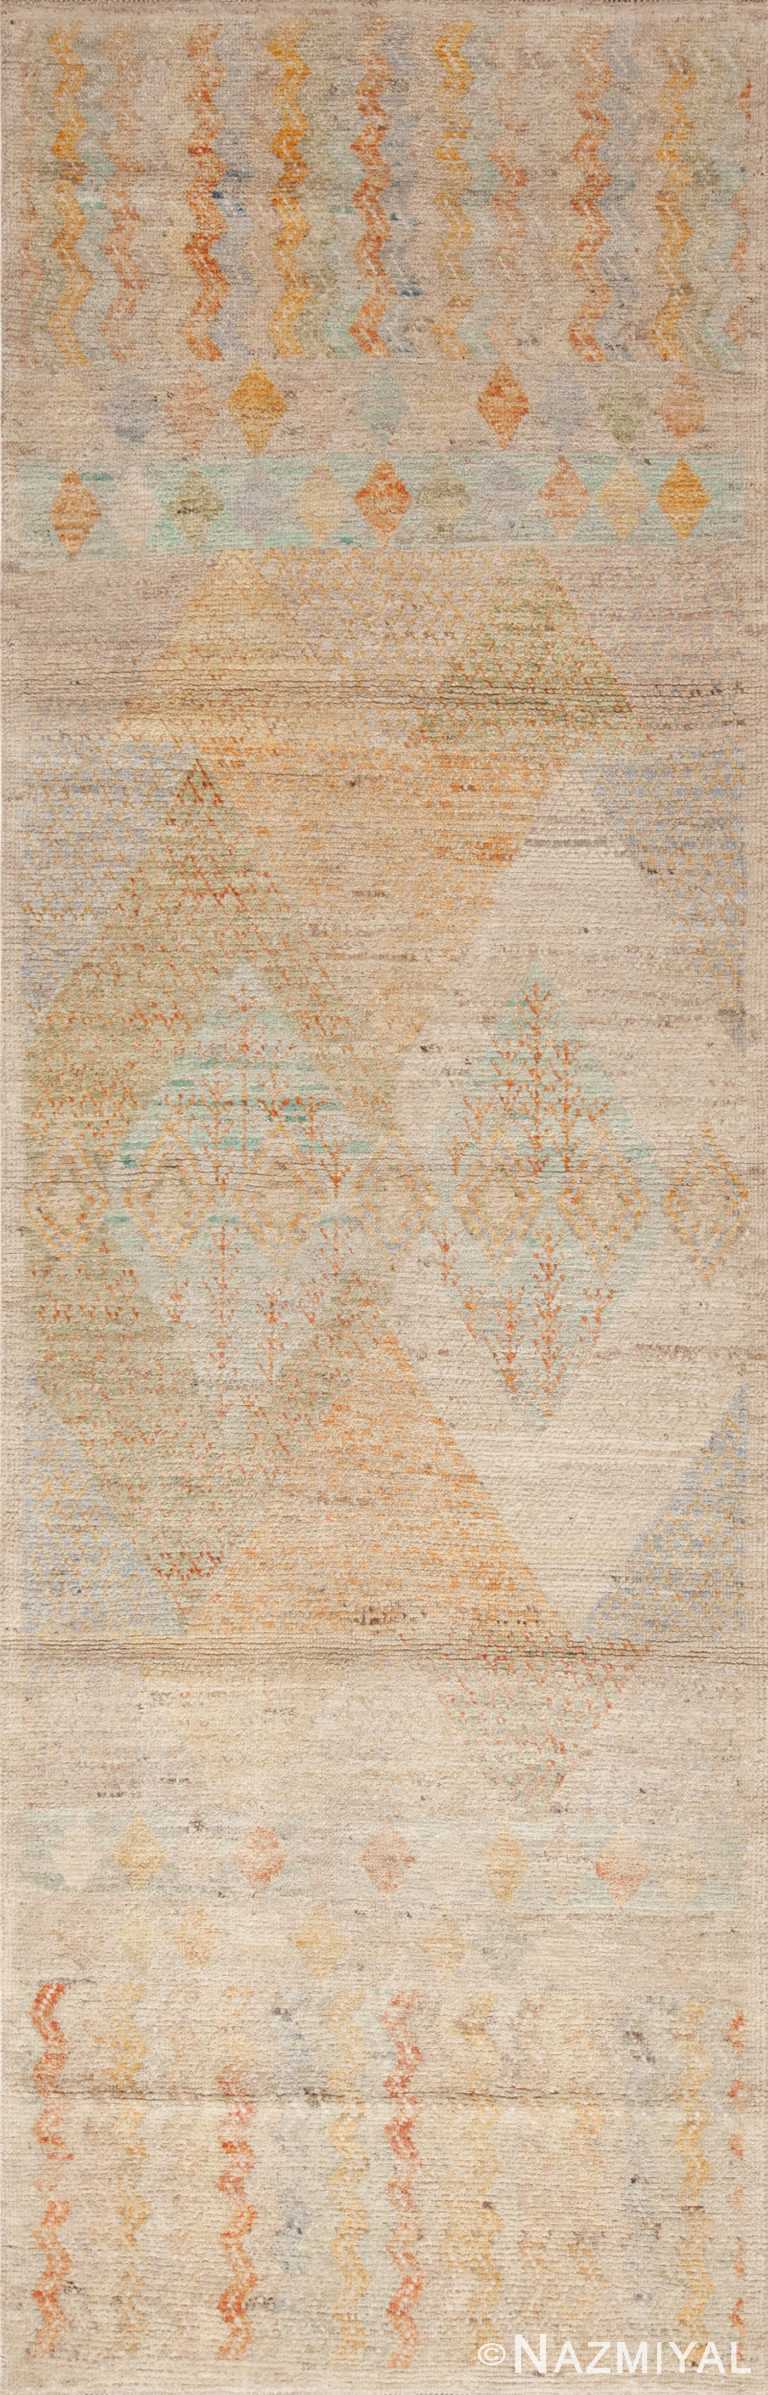 Light Happy Color Modern Tribal Geometric Contemporary Hallway Runner Rug 11011 by Nazmiyal Antique Rugs